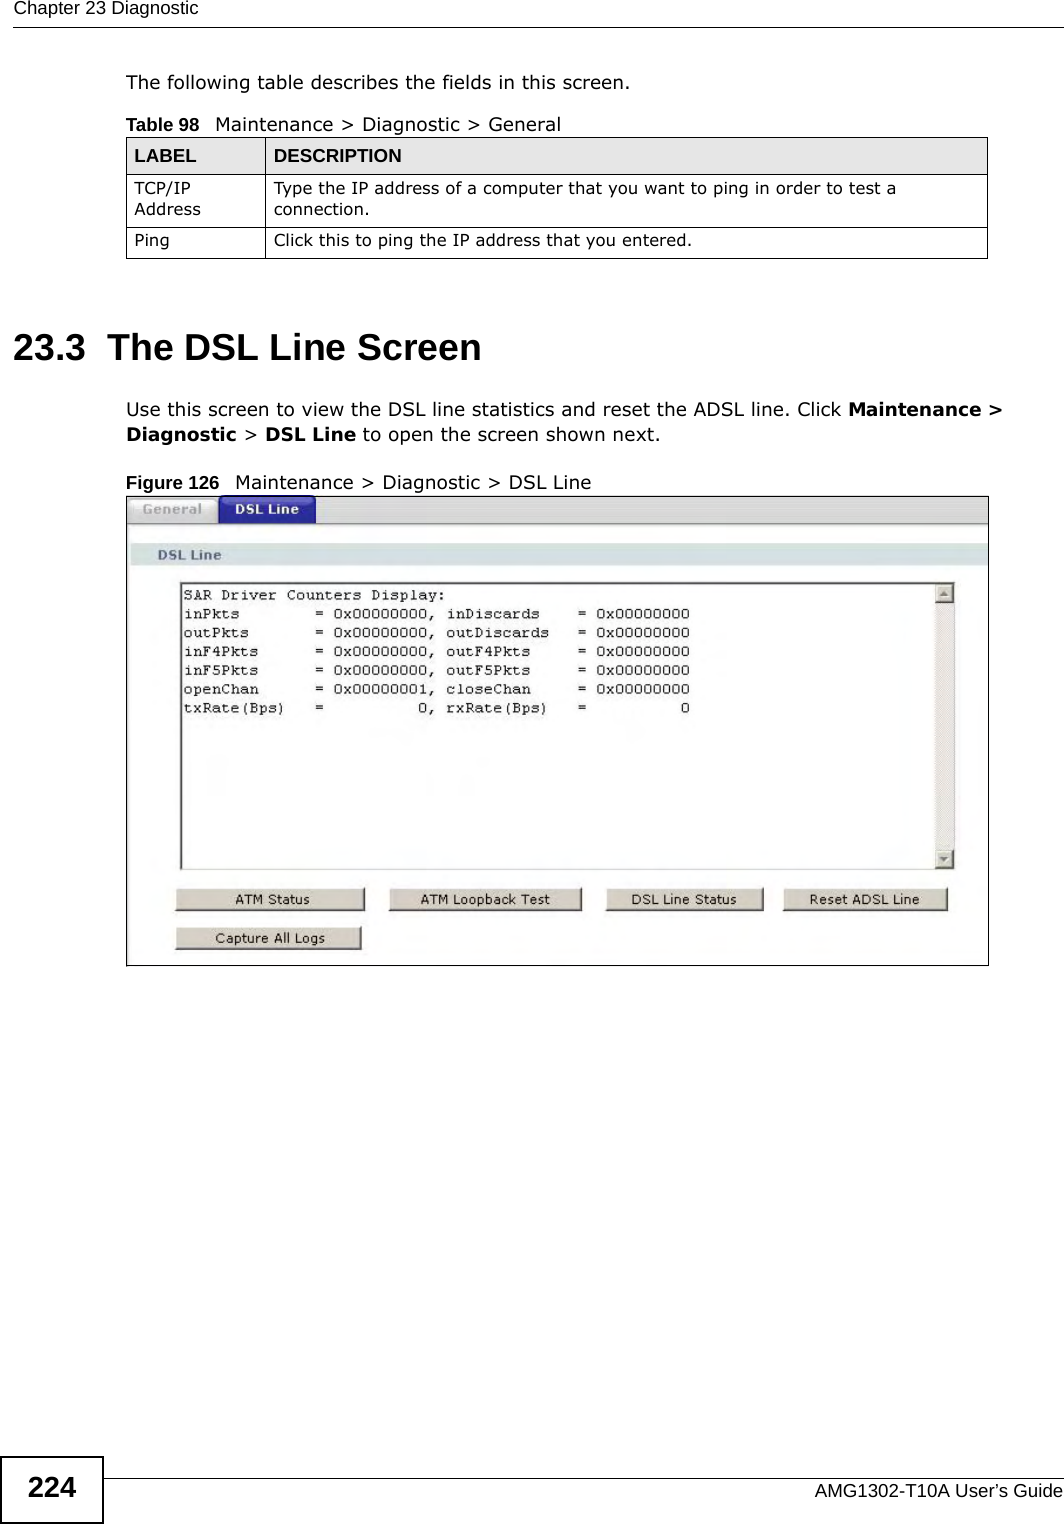 Chapter 23 DiagnosticAMG1302-T10A User’s Guide224The following table describes the fields in this screen. 23.3  The DSL Line Screen Use this screen to view the DSL line statistics and reset the ADSL line. Click Maintenance &gt; Diagnostic &gt; DSL Line to open the screen shown next.Figure 126   Maintenance &gt; Diagnostic &gt; DSL LineTable 98   Maintenance &gt; Diagnostic &gt; GeneralLABEL DESCRIPTIONTCP/IP AddressType the IP address of a computer that you want to ping in order to test a connection.Ping Click this to ping the IP address that you entered.